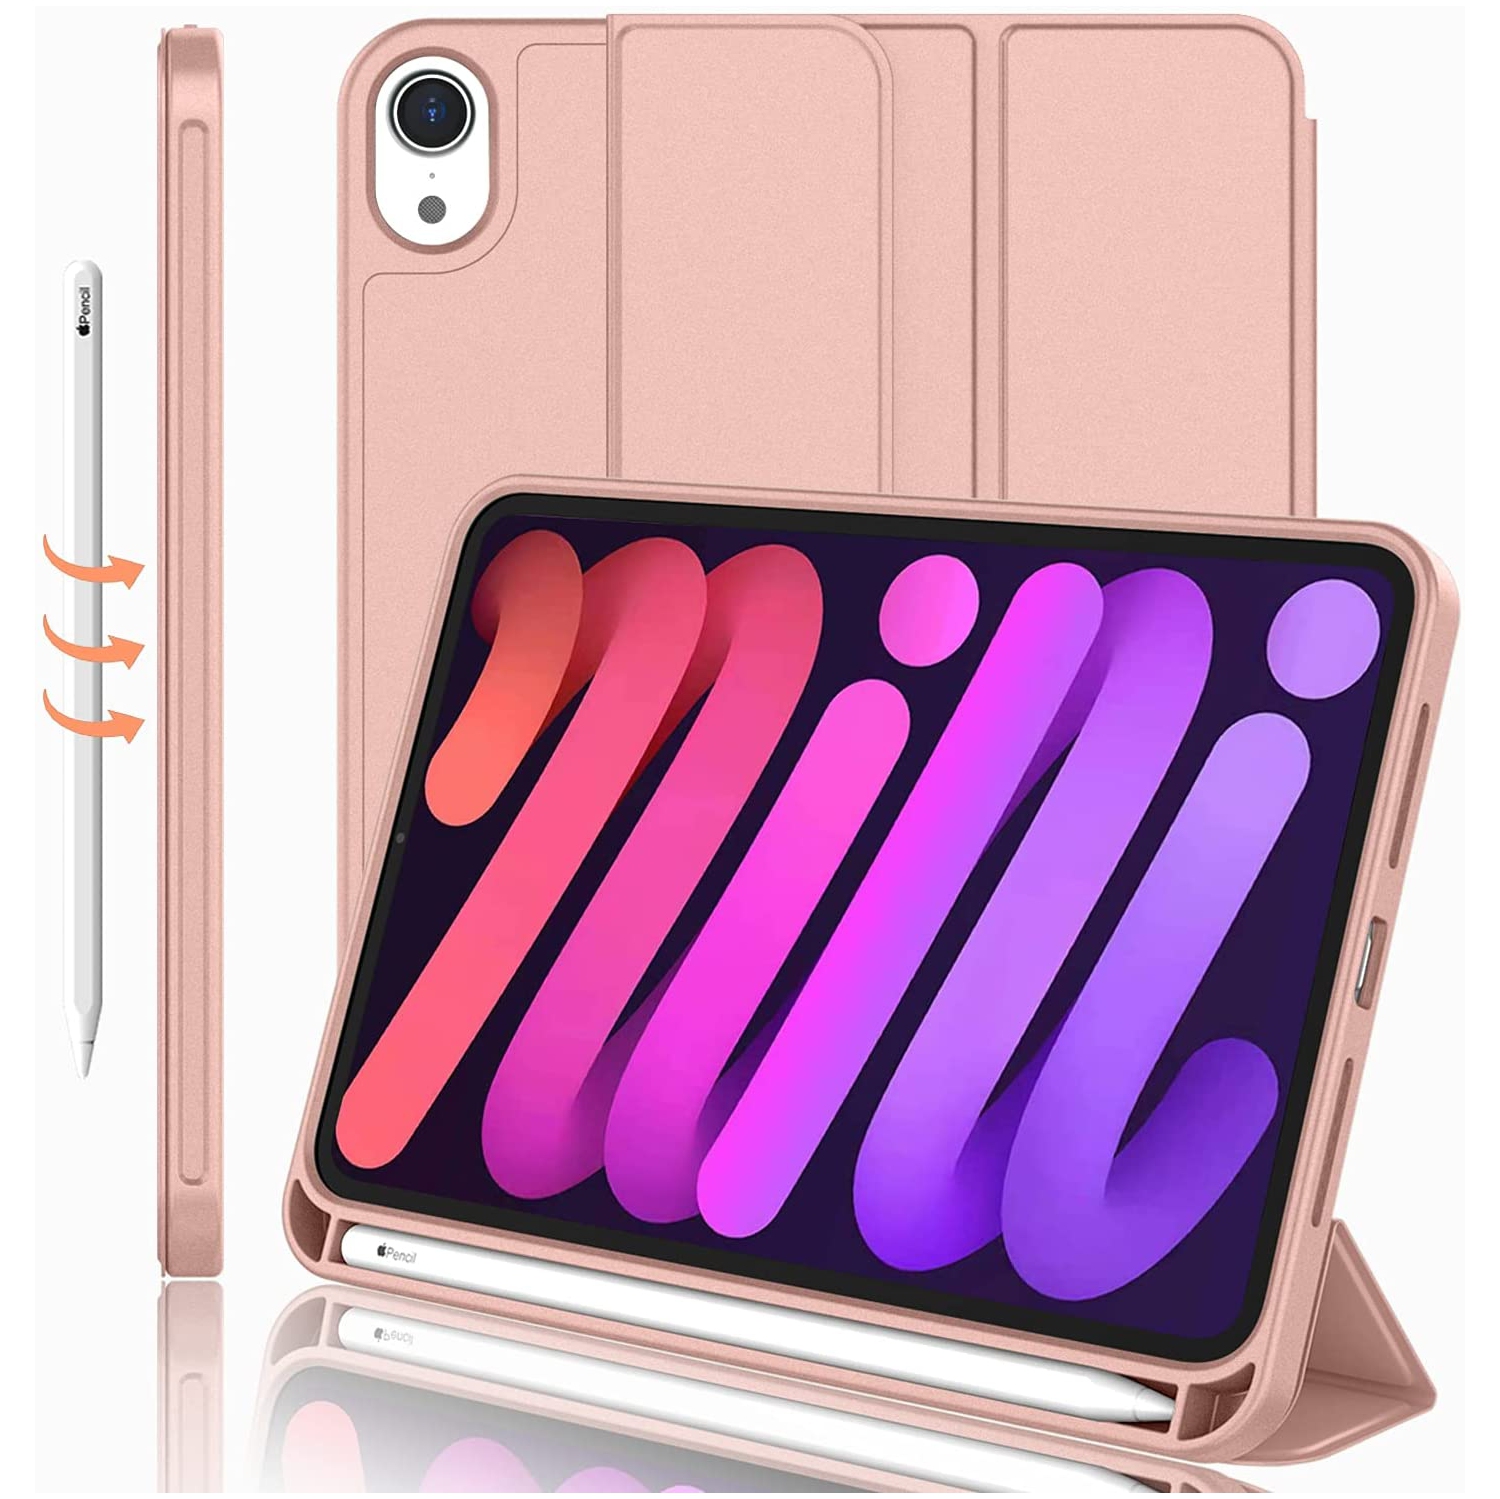 【CSmart】 Slim Magnetic Smart Cover Stand Case & Pencil Holder for iPad Mini 6 6th Gen. 2021 (8.3"), Rose Gold